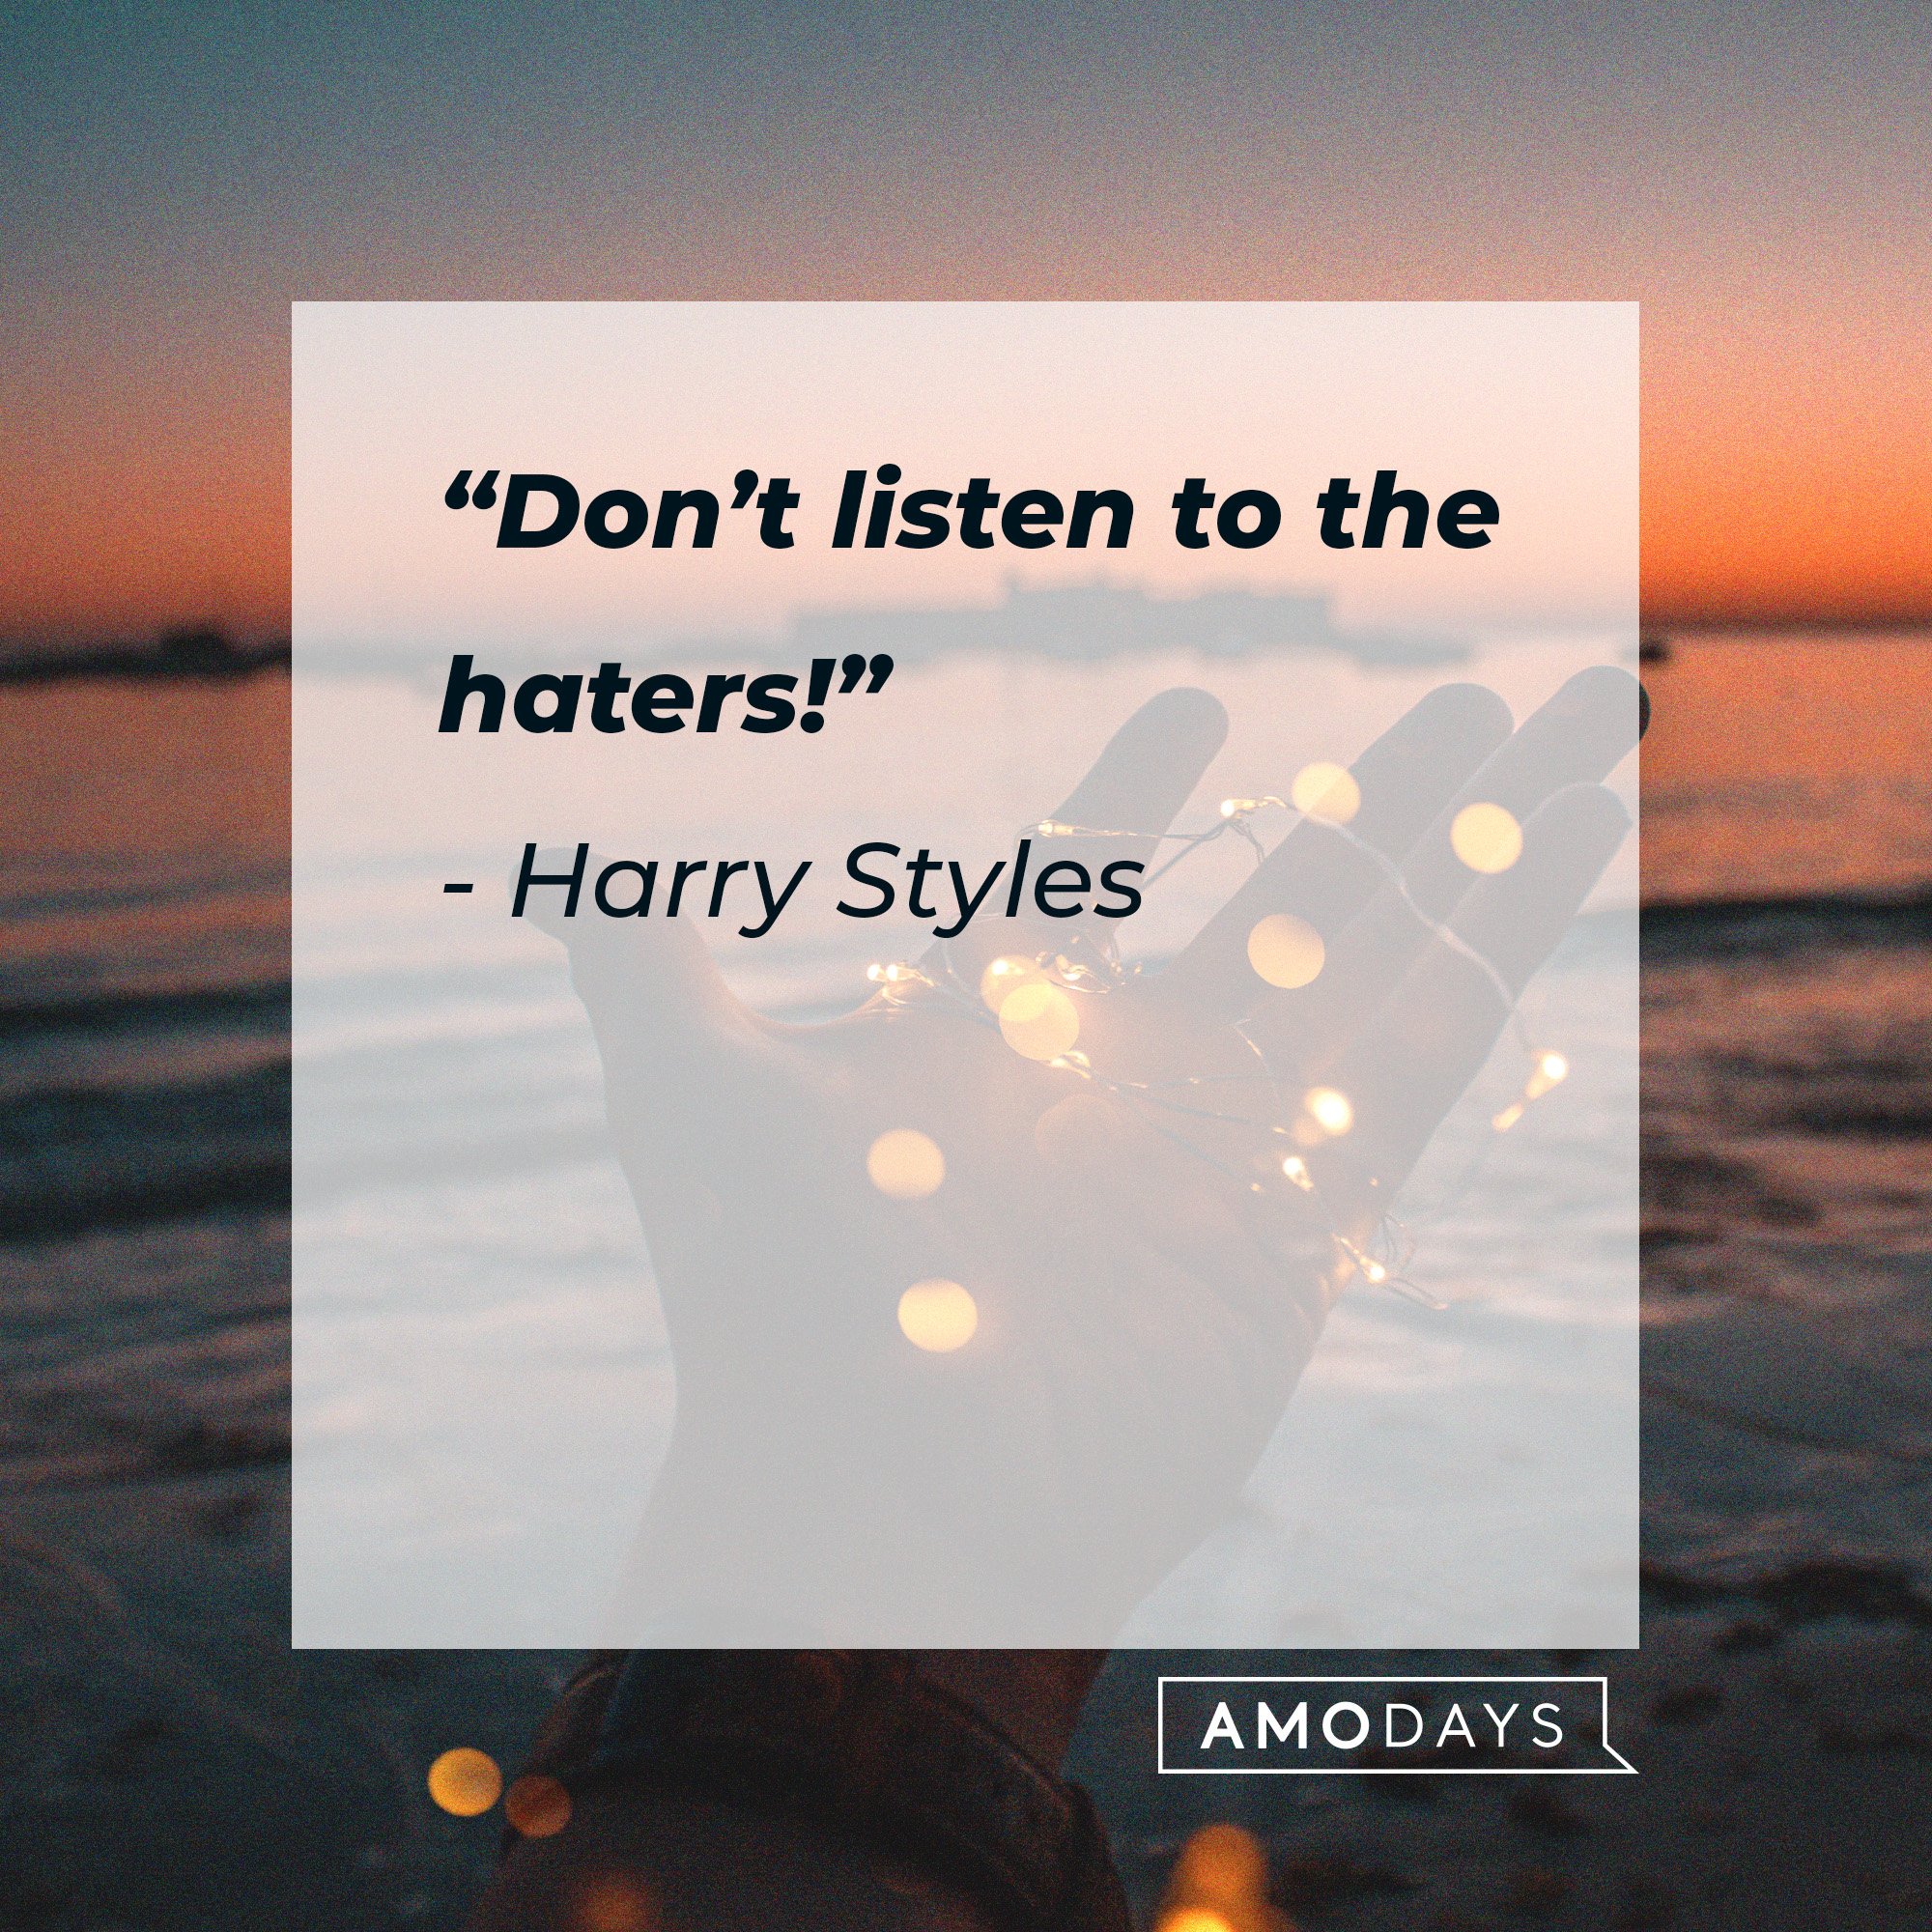 Harry Styles’ quote: “Don’t listen to the haters!” | Source: AmoDays